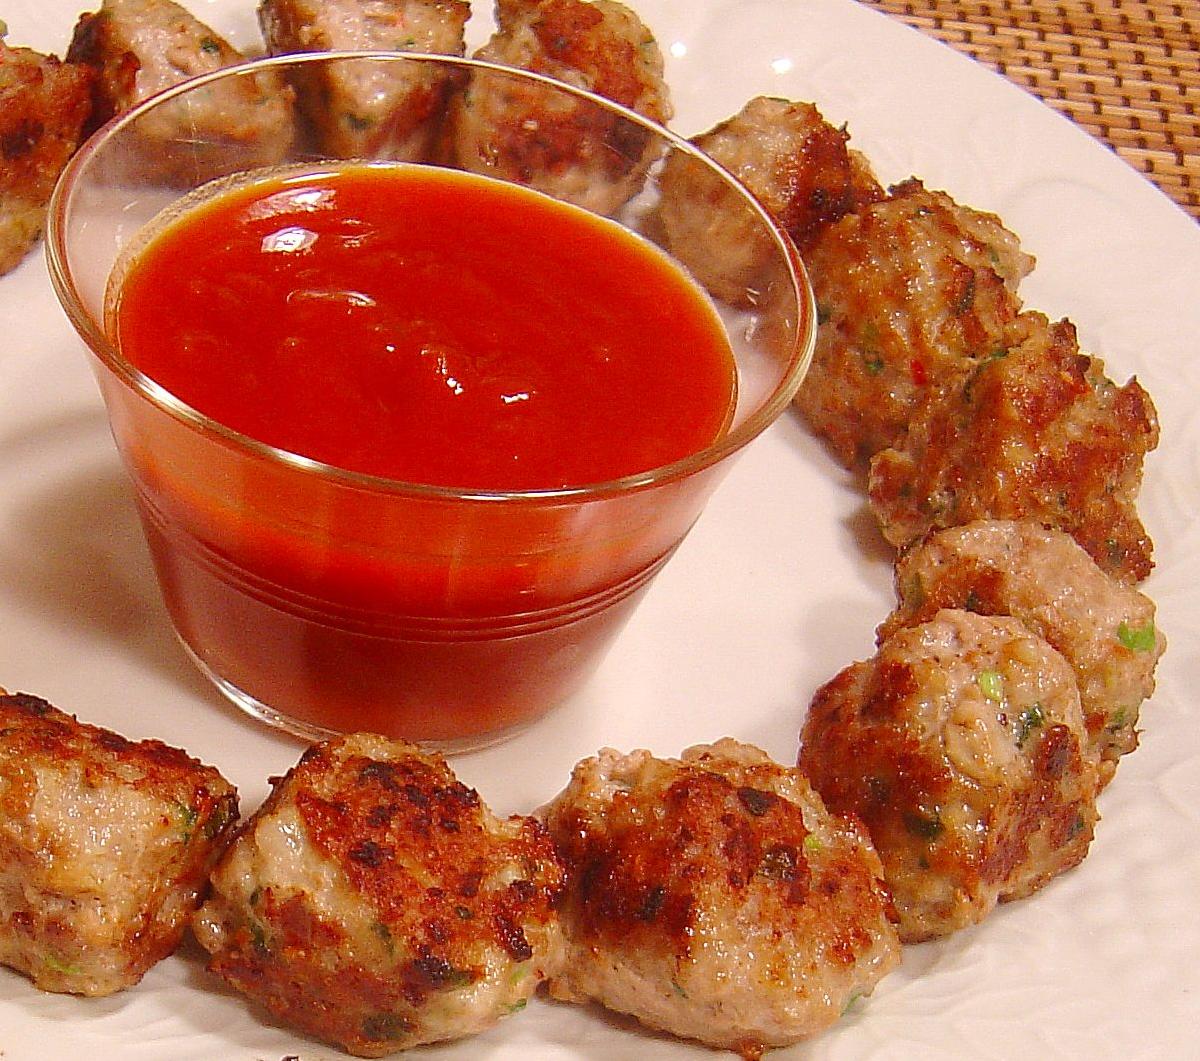 Vietnamese Pork Balls With Hot and Sour Dipping Sauce